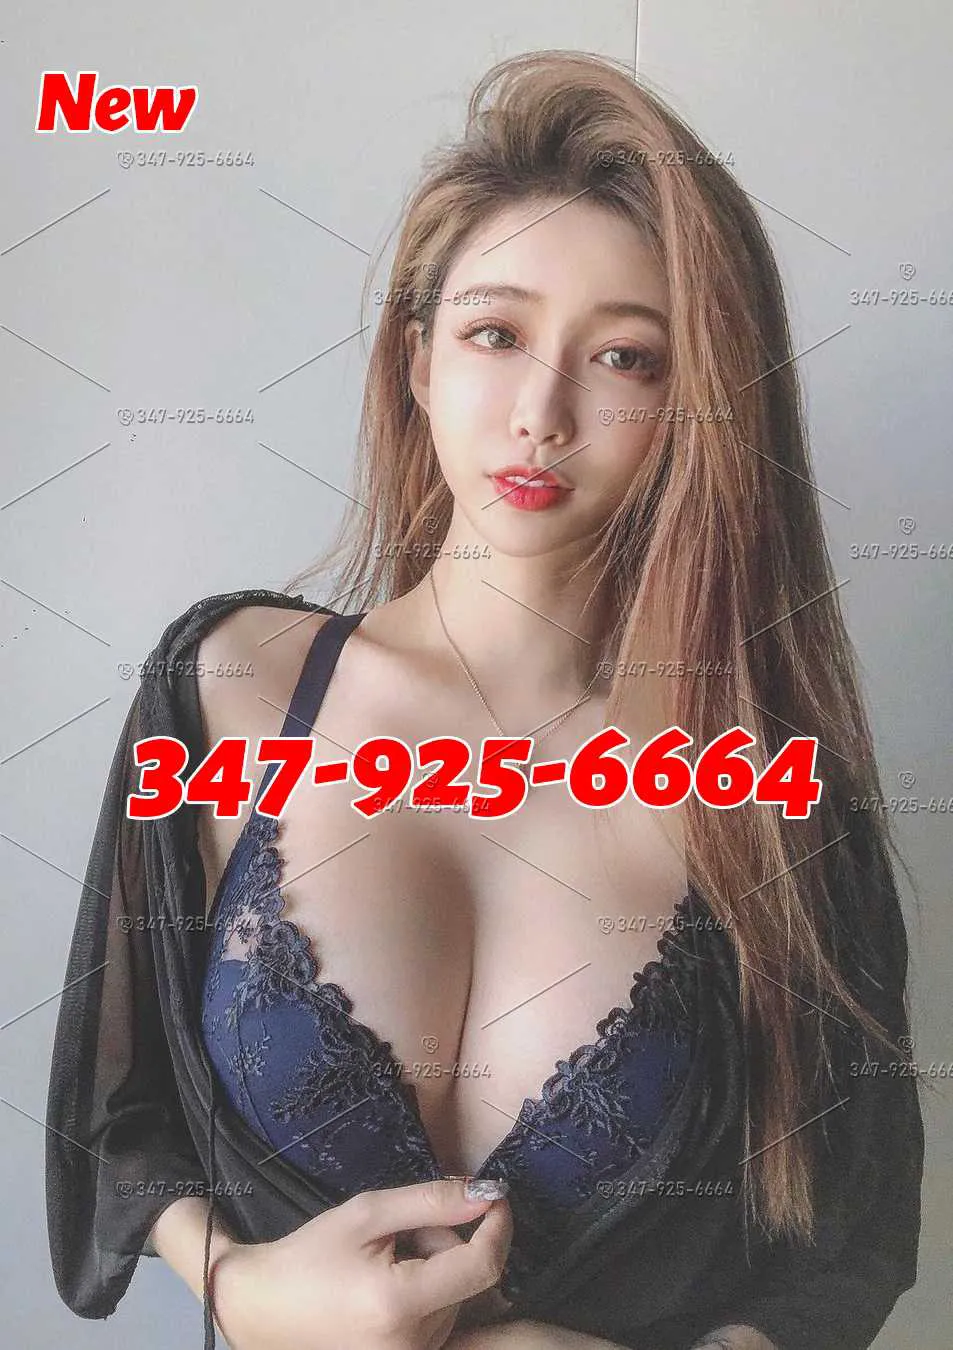 Reviews about escort with phone number 3479256664